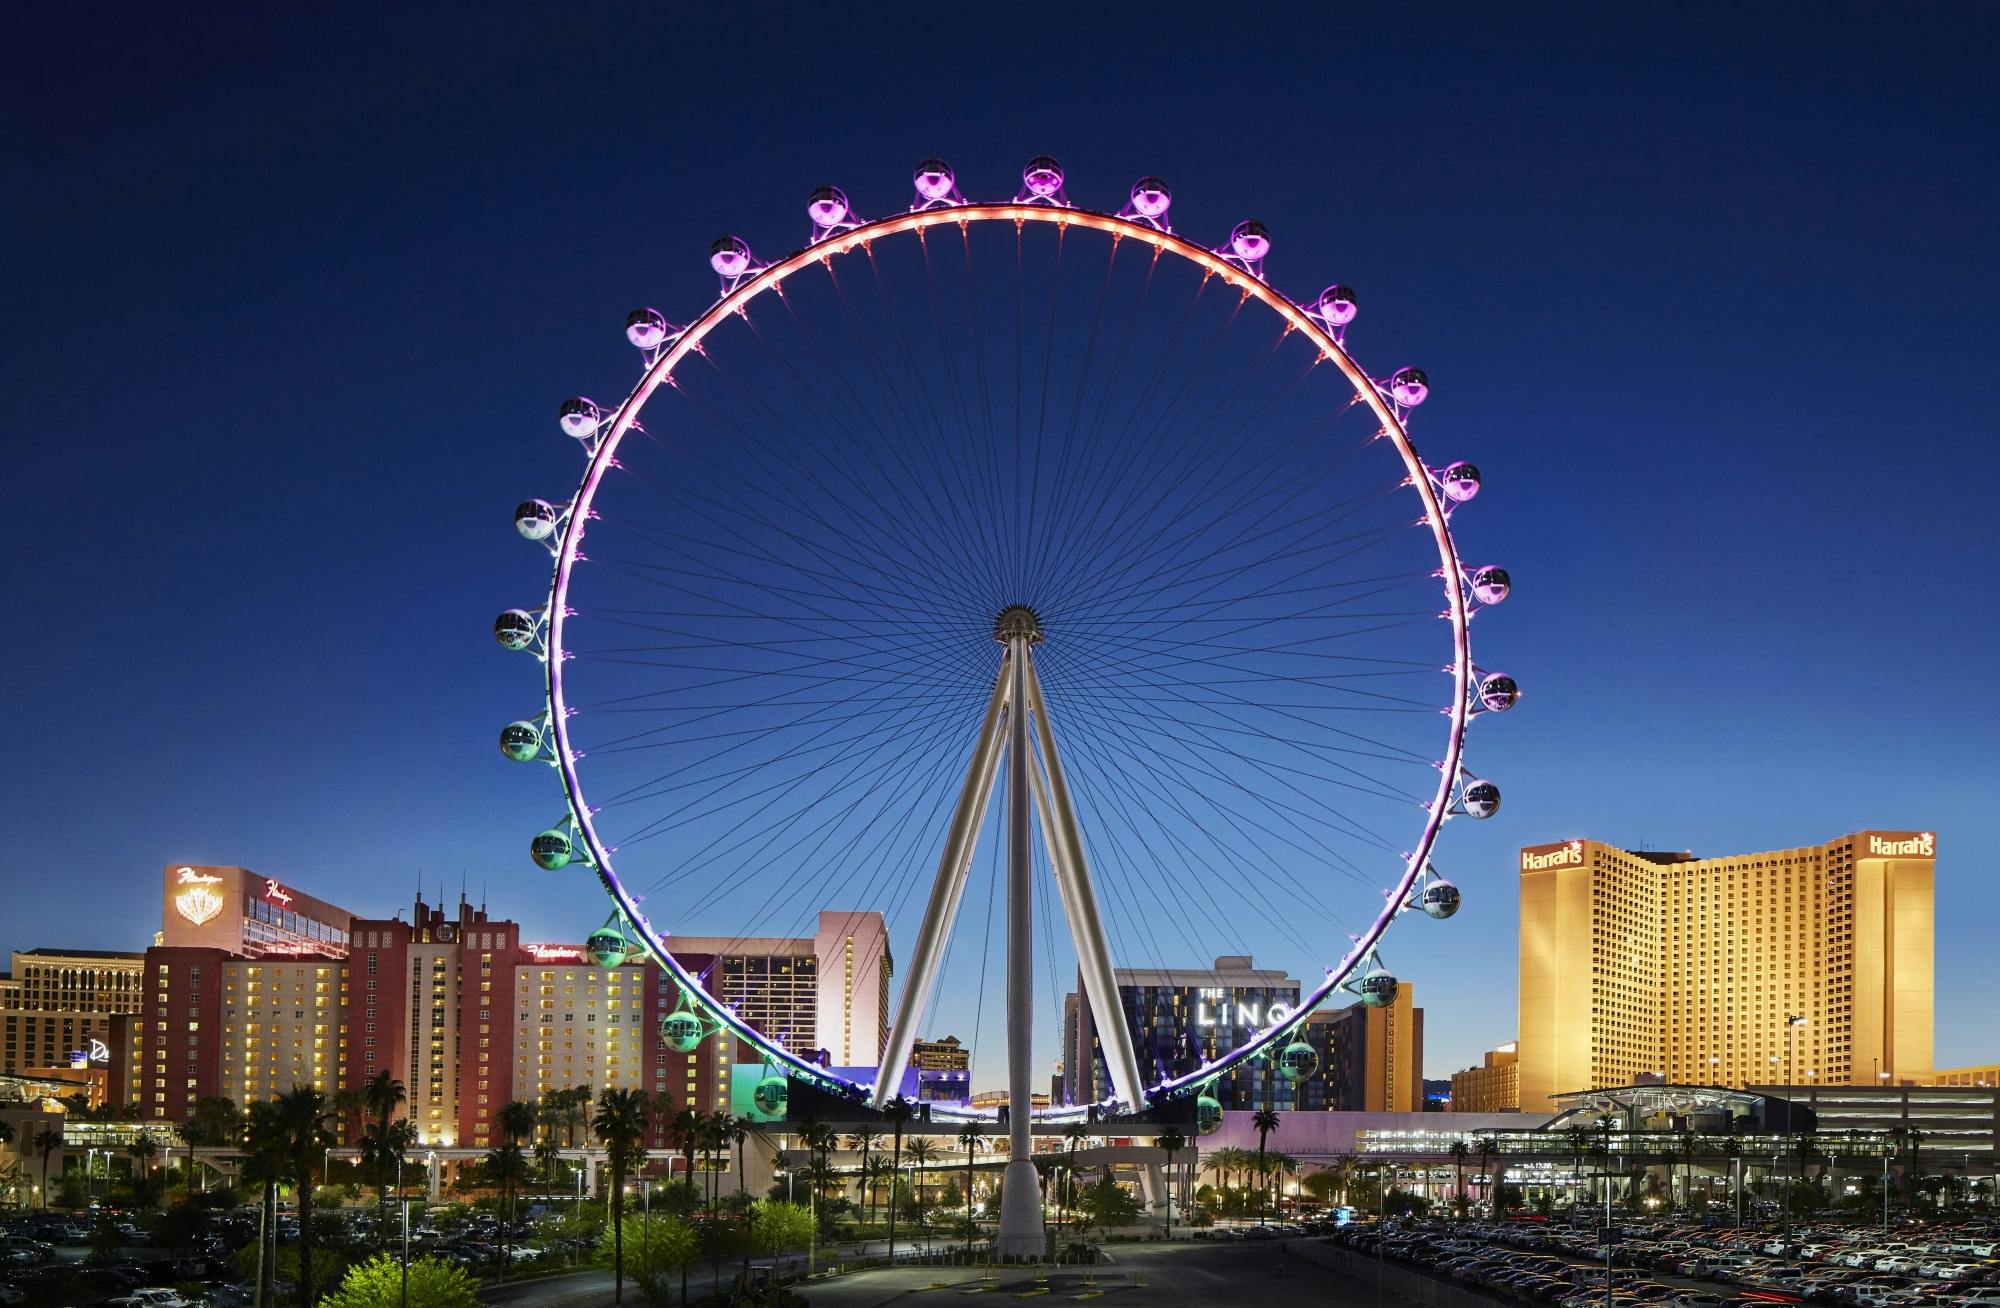 The High Roller Observation Wheel at LINQ tickets Musement